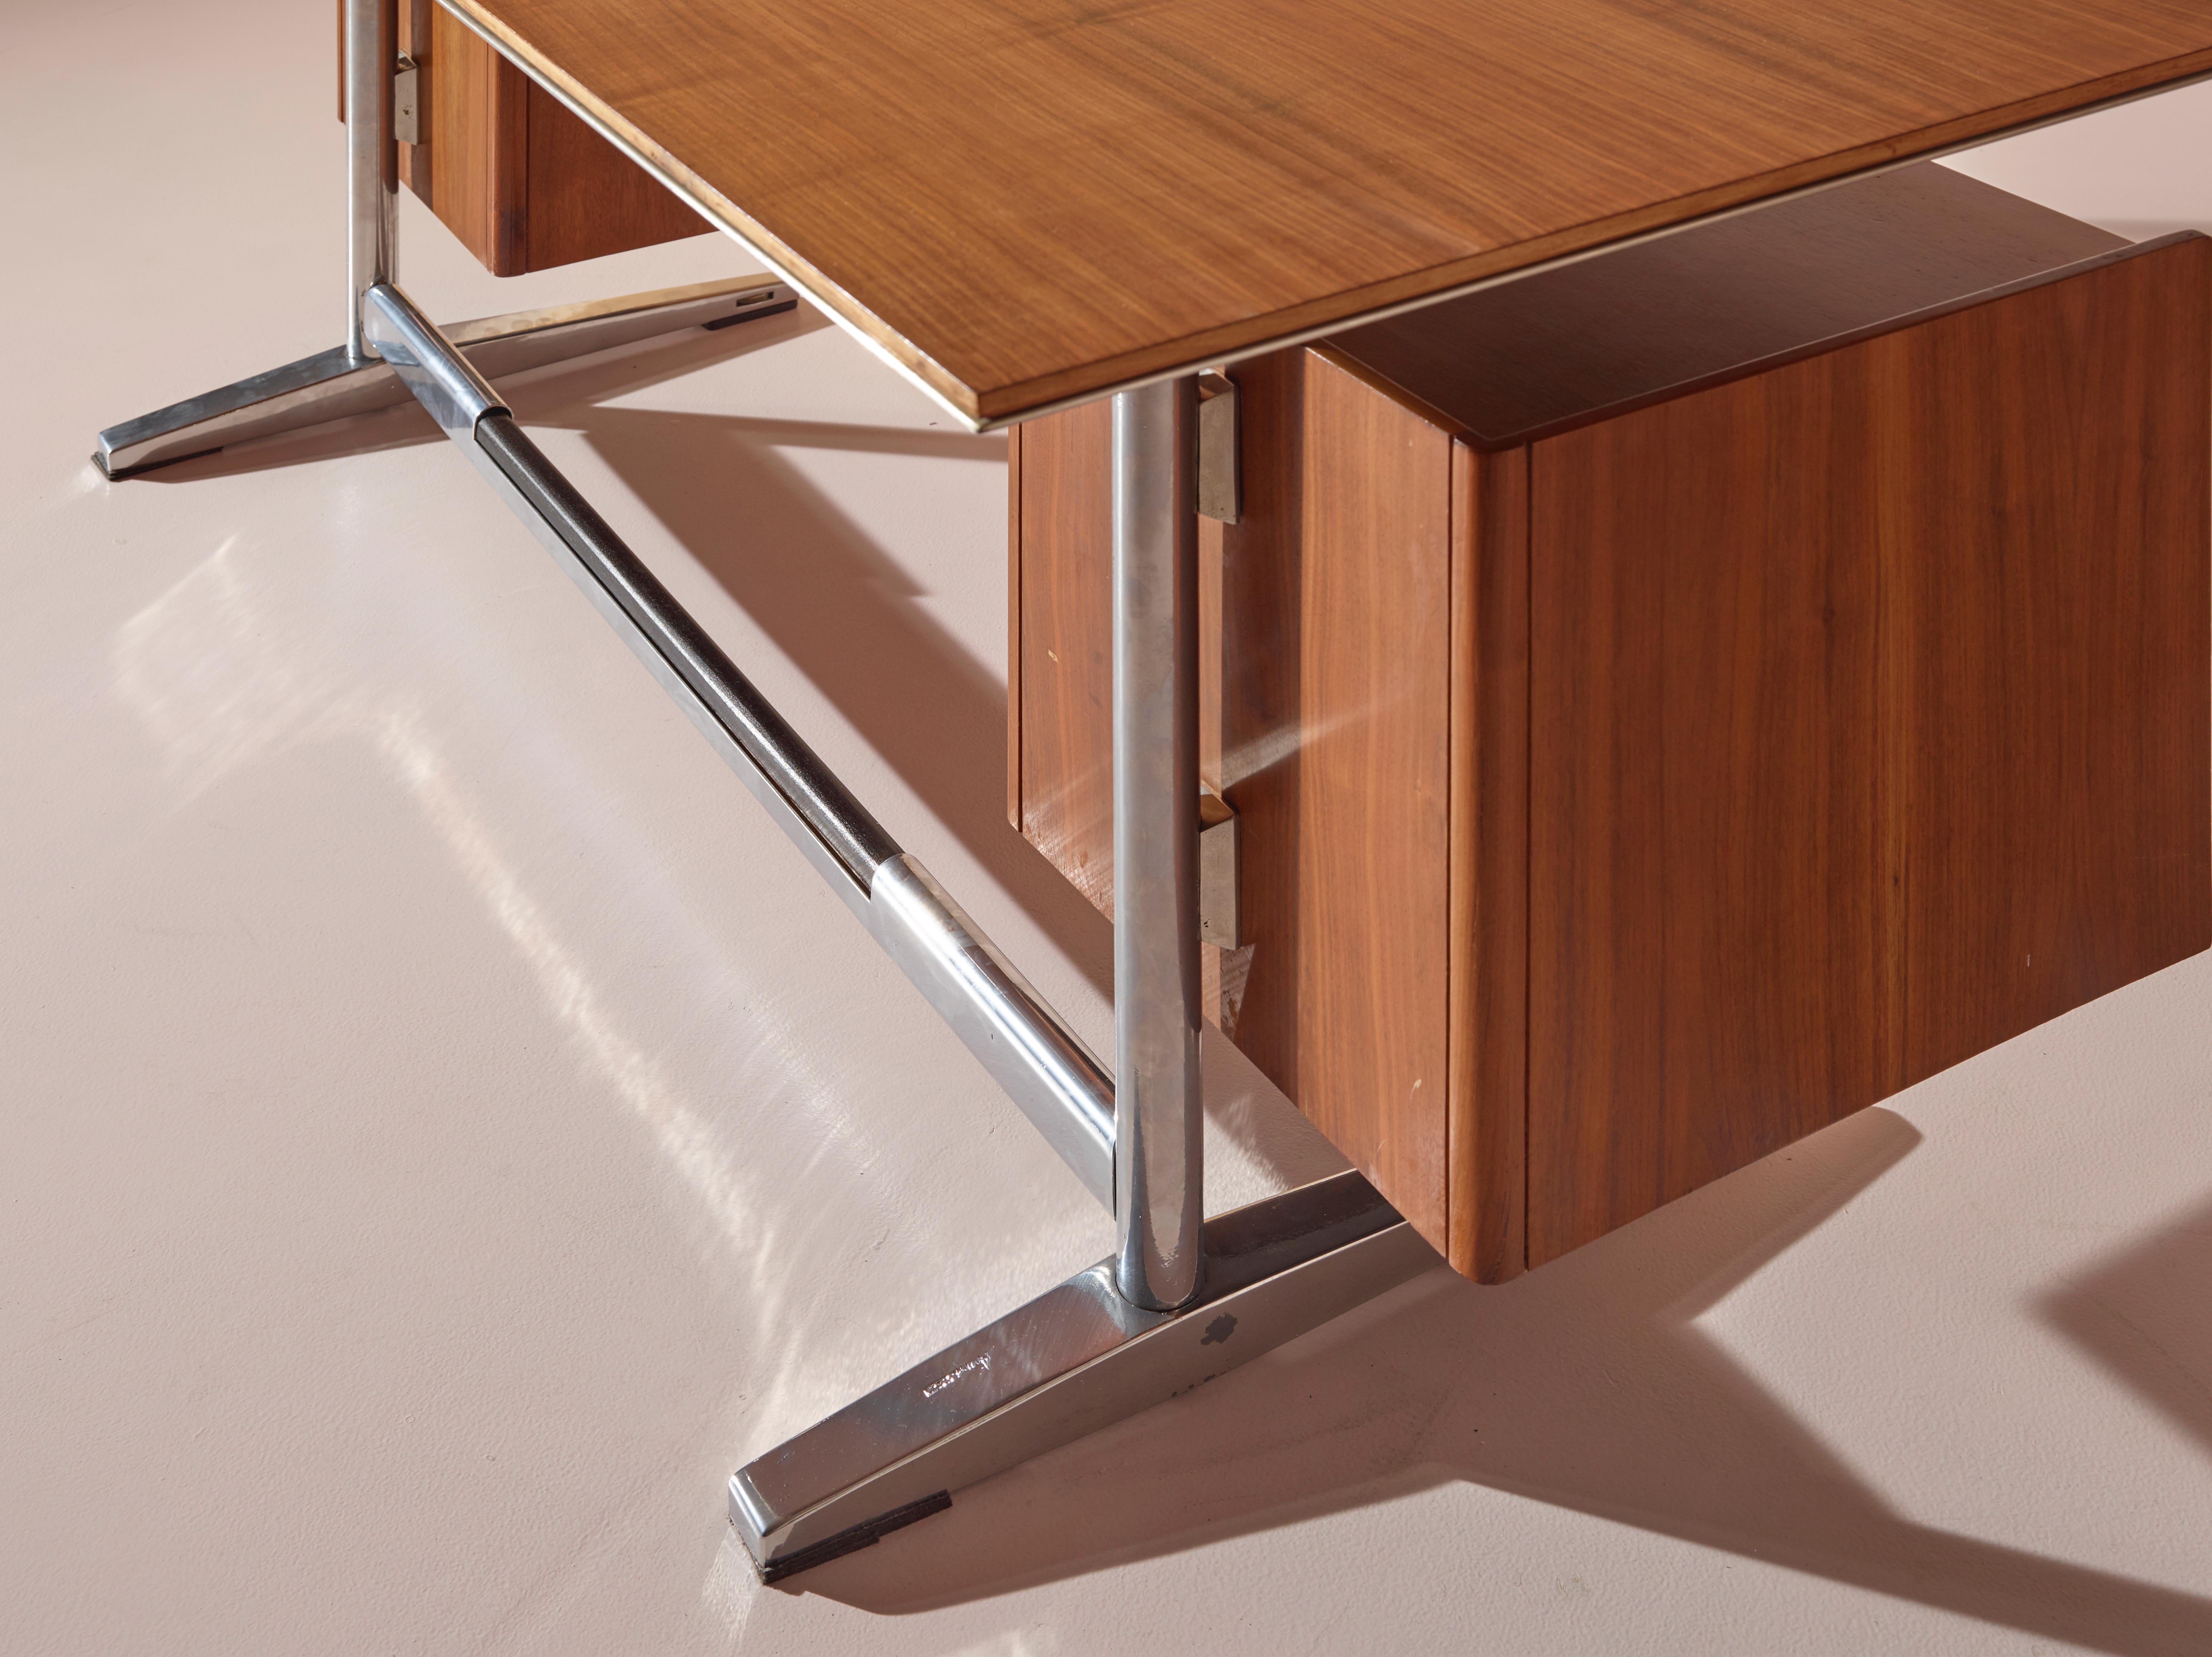 Mid-20th Century Gio Ponti Desk for RIMA Made in Walnut, Chromed Steel and Plastic. Italy, 1950s For Sale